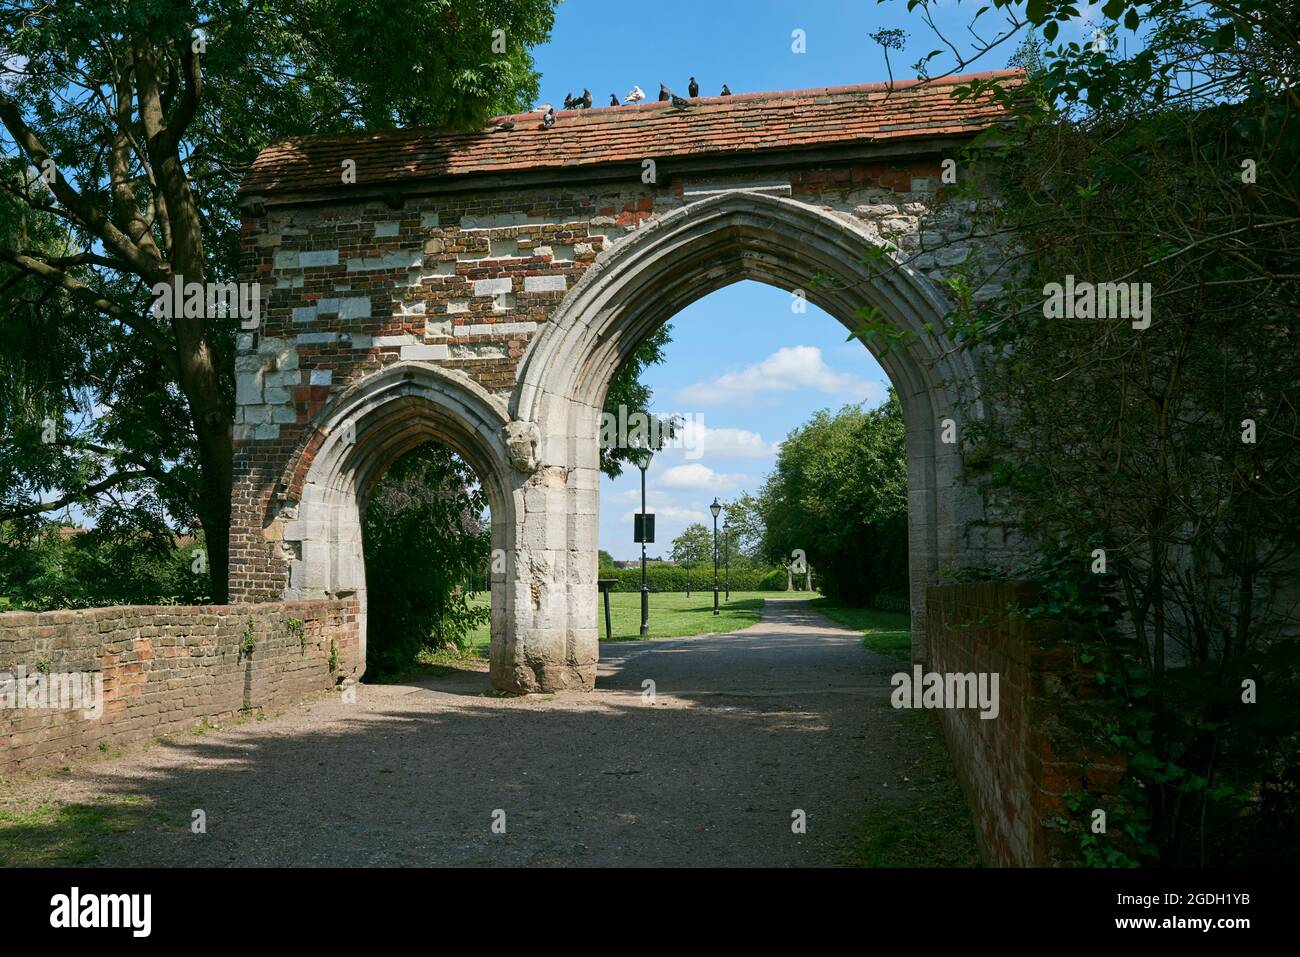 Remains of the 14th century abbey gatehouse at Waltham Abbey, Essex, Southern England Stock Photo